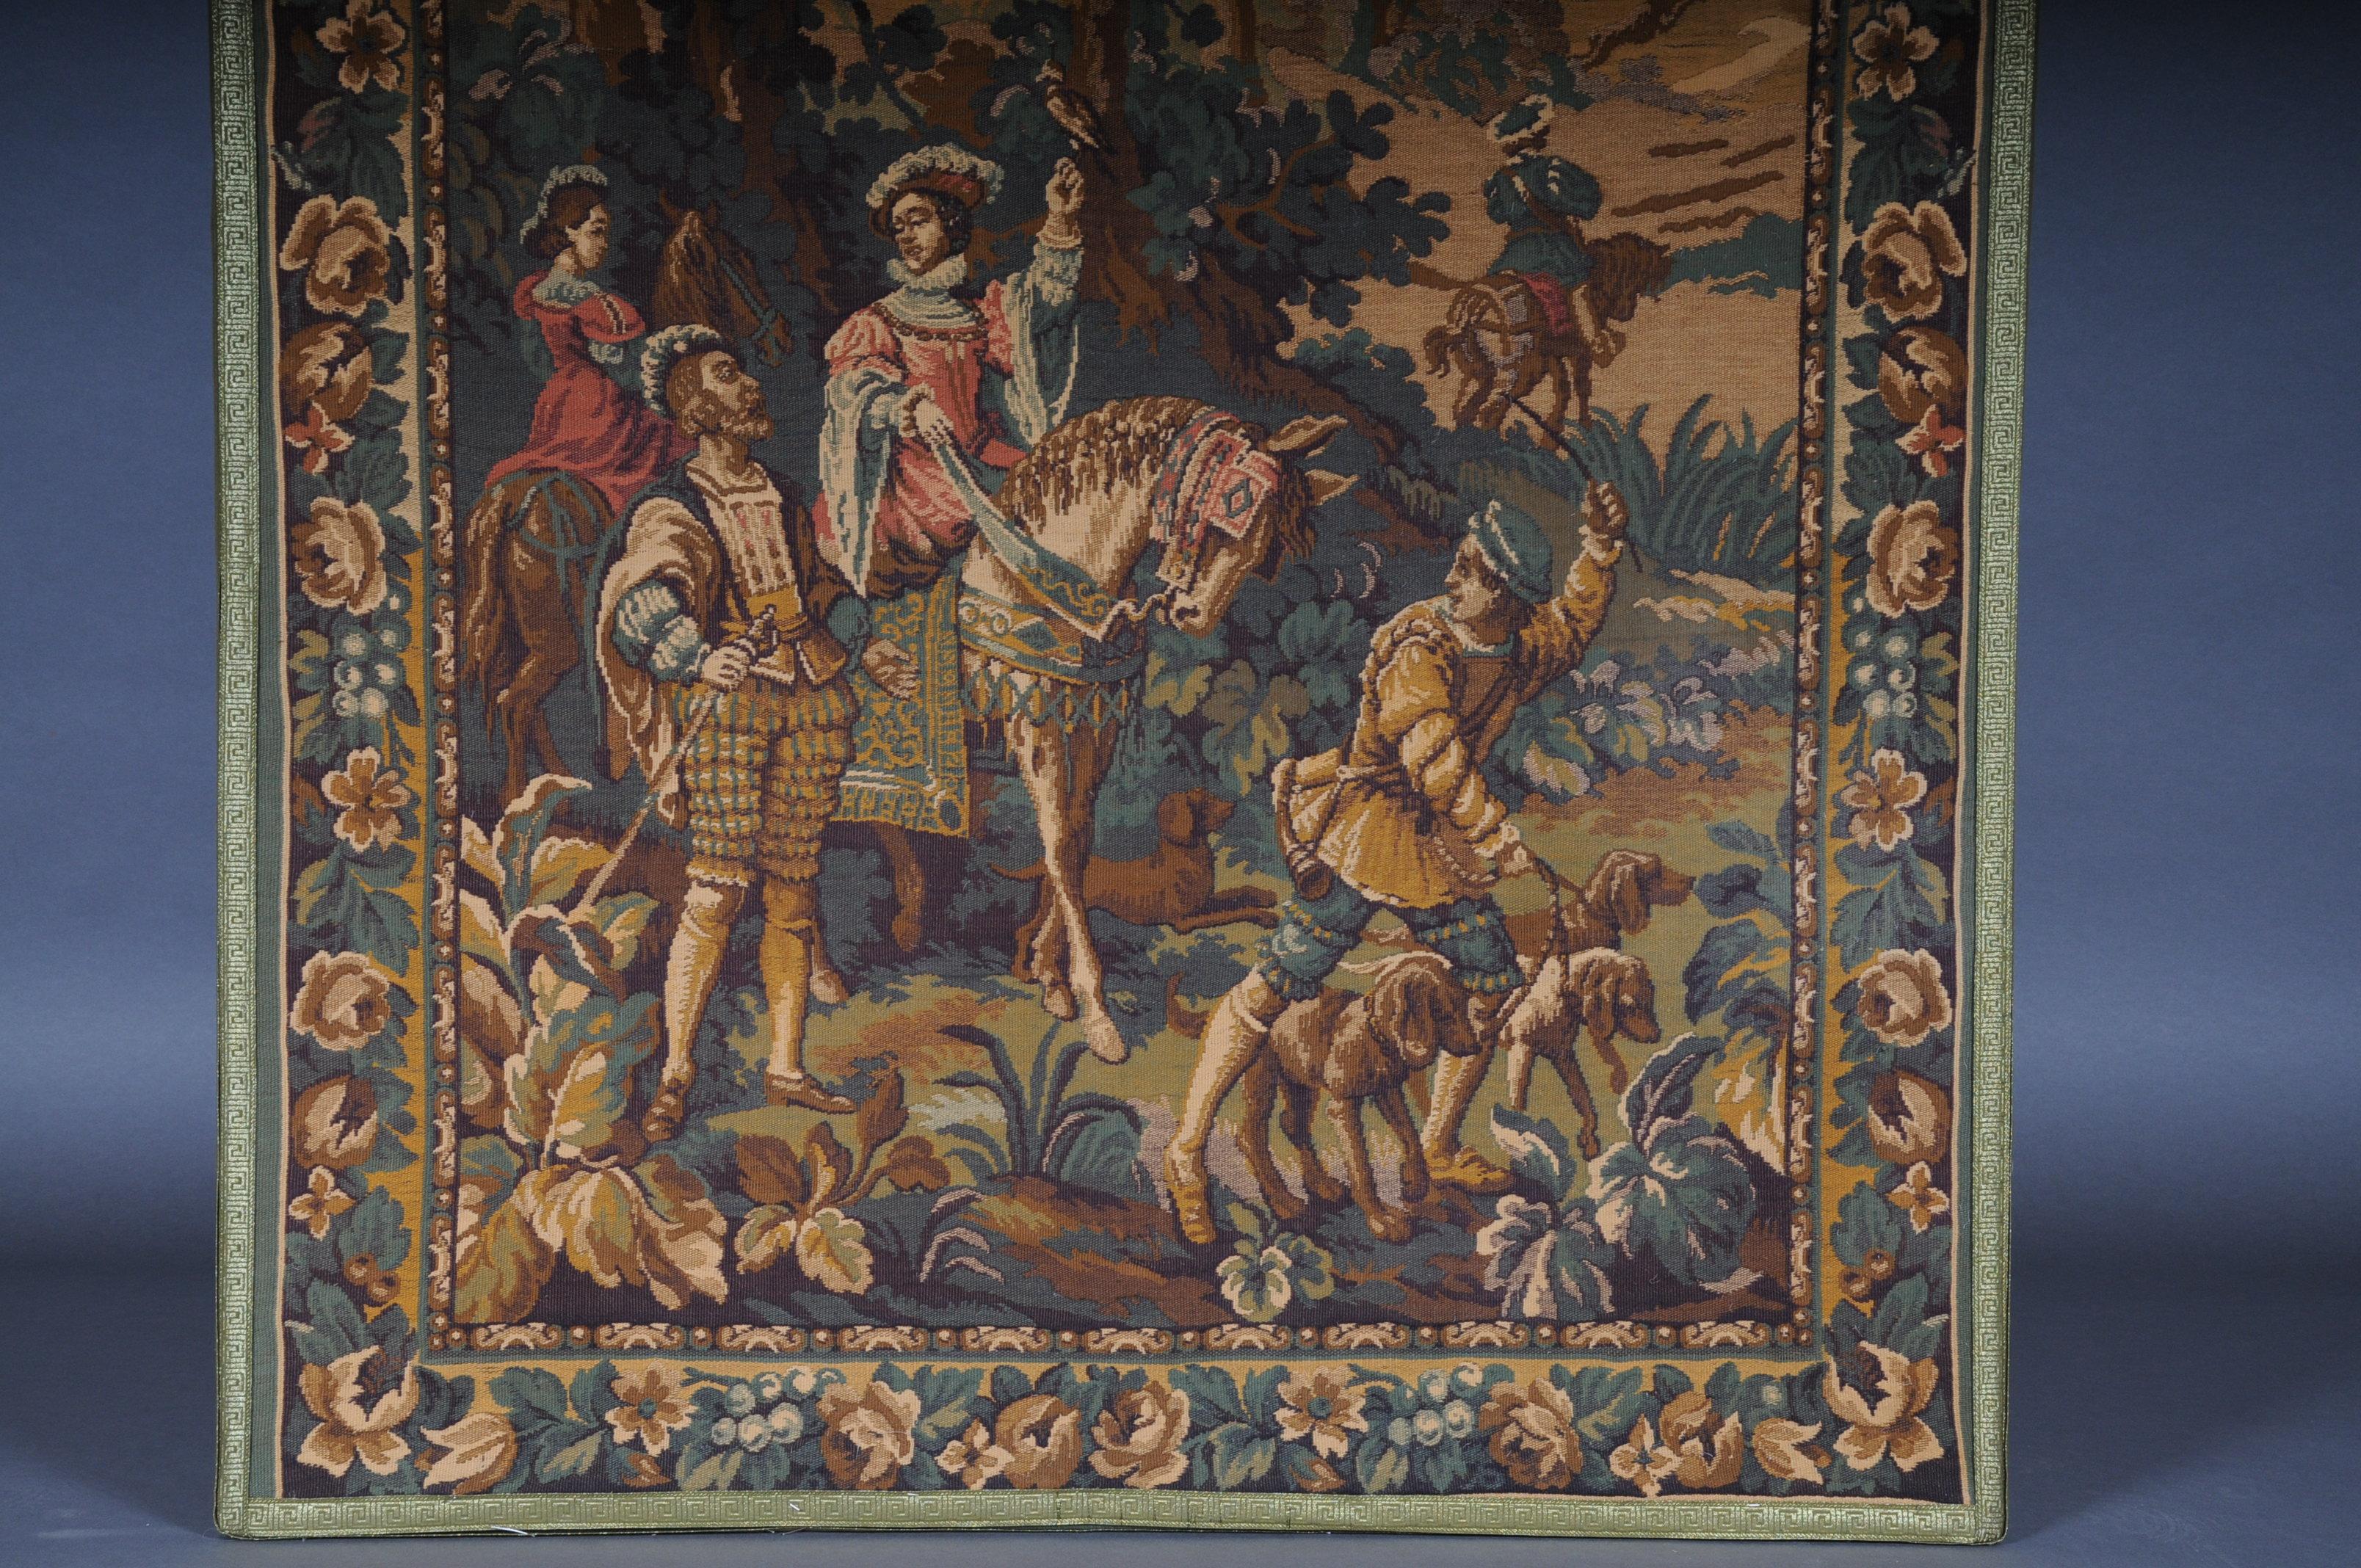 20th Century Museum Tapestry/Gobelein

Impressive and monumental tapestry. 20th century finely woven tapestry. Probably France.

An extensive landscape and scene depiction can be seen. Very colorful and detailed woven.
An absolute eye-catcher.